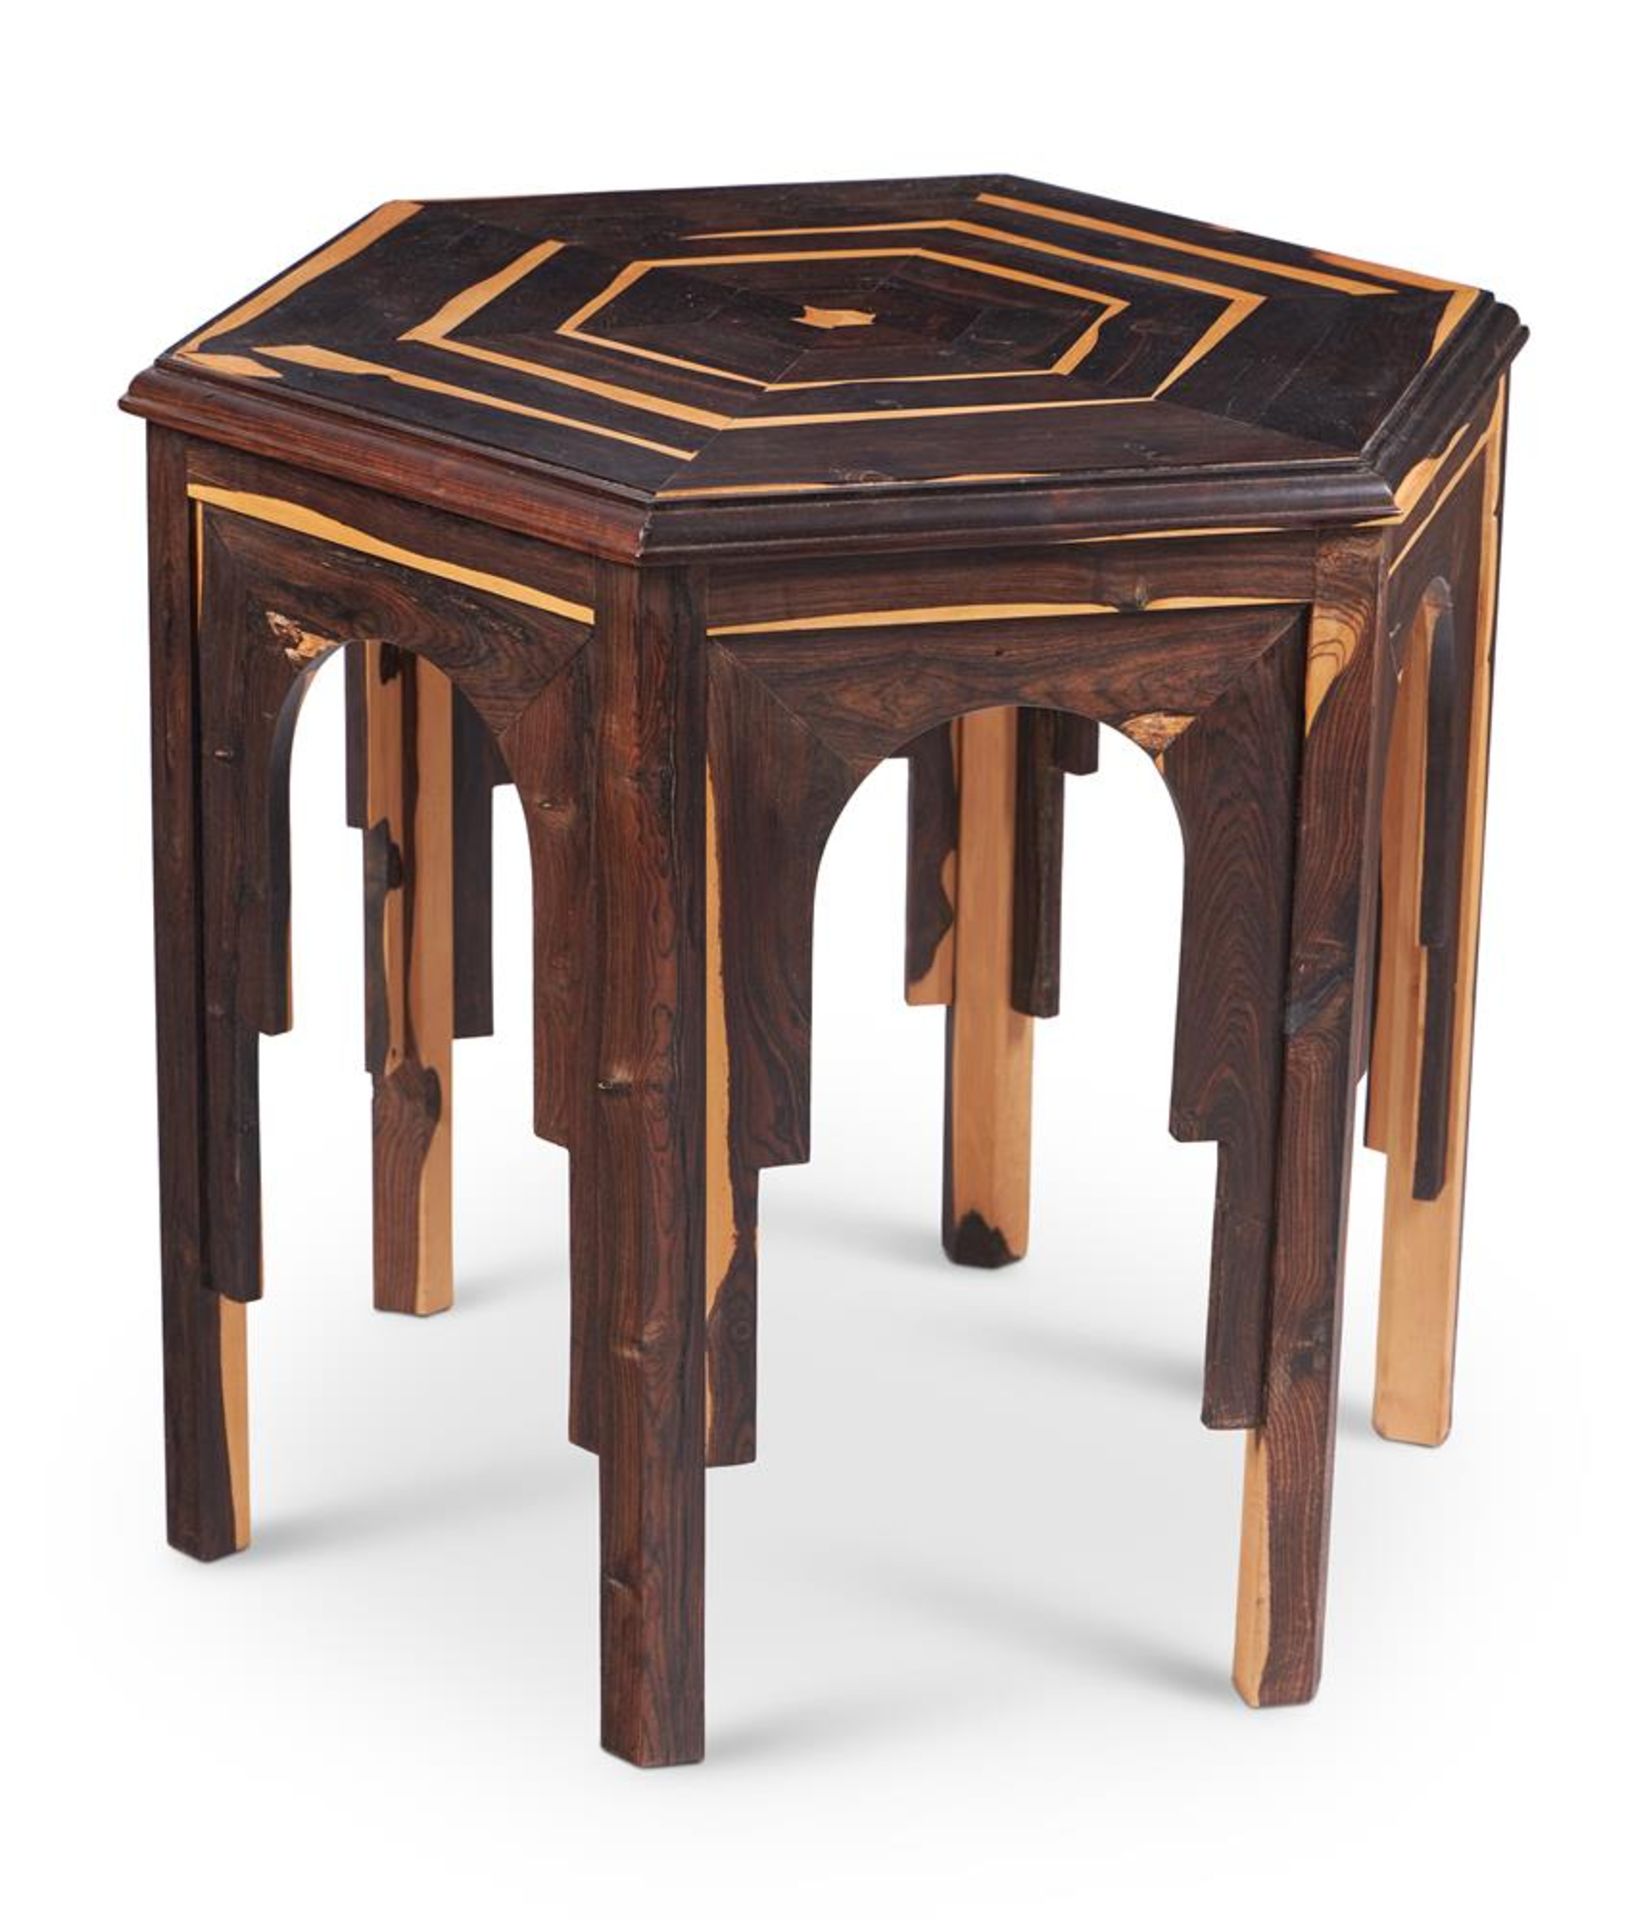 A CALAMANDER OCTAGONAL OCCASIONAL TABLE, SECOND HALF 20TH CENTURY